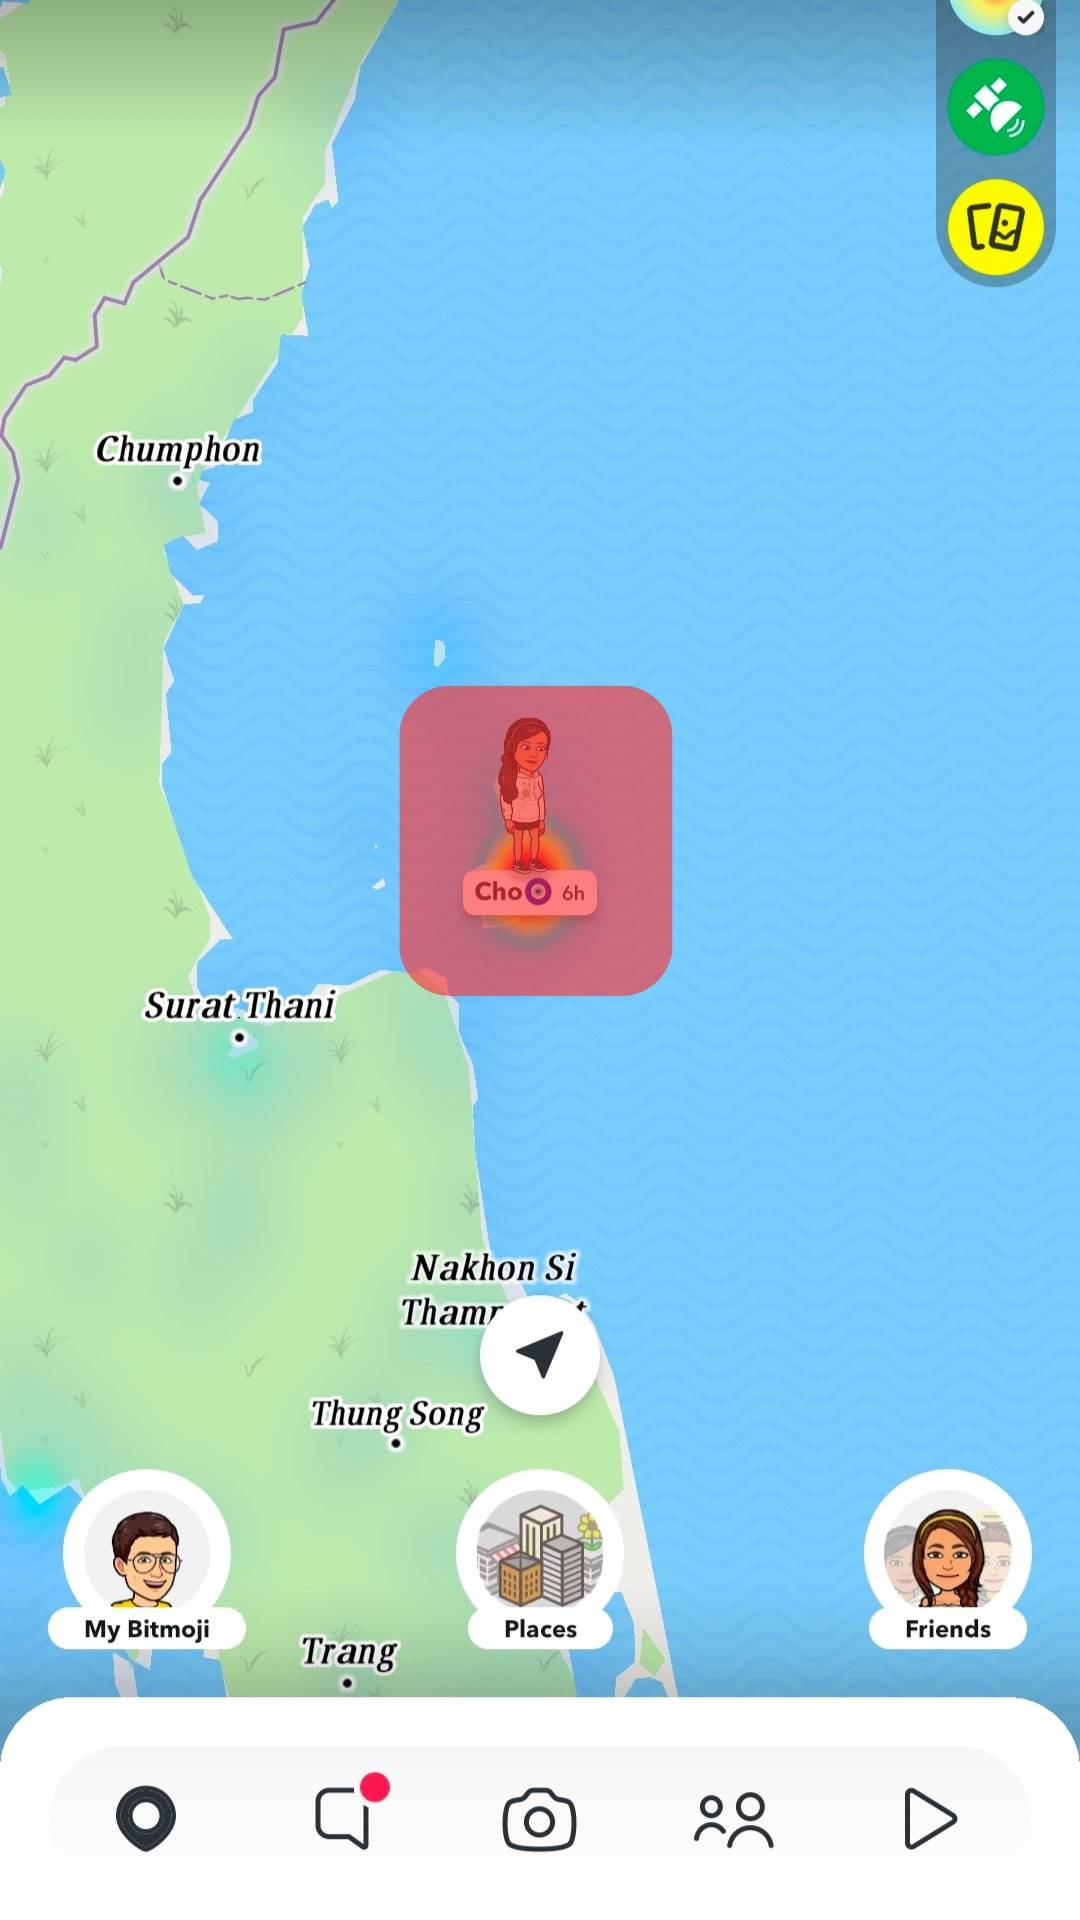 You'll Get The Bitmojis Of Friends Over The Map.